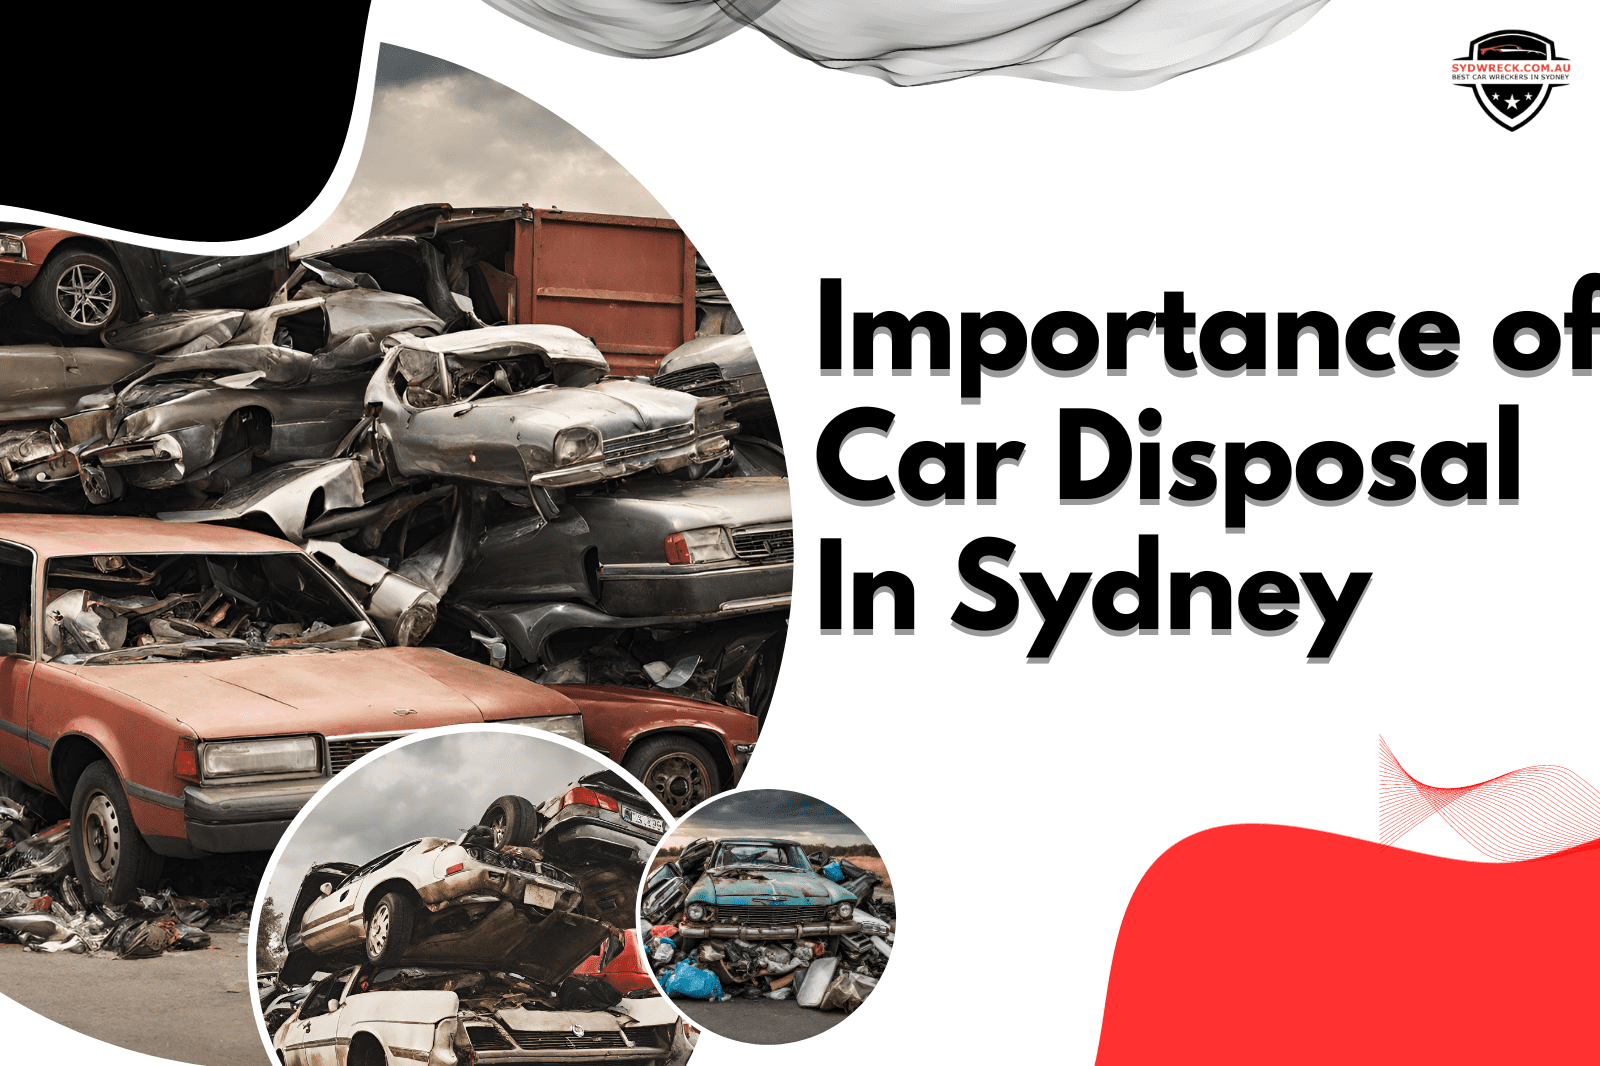 The Importance Of Proper Car Disposal In Sydney's Wrecking Industry